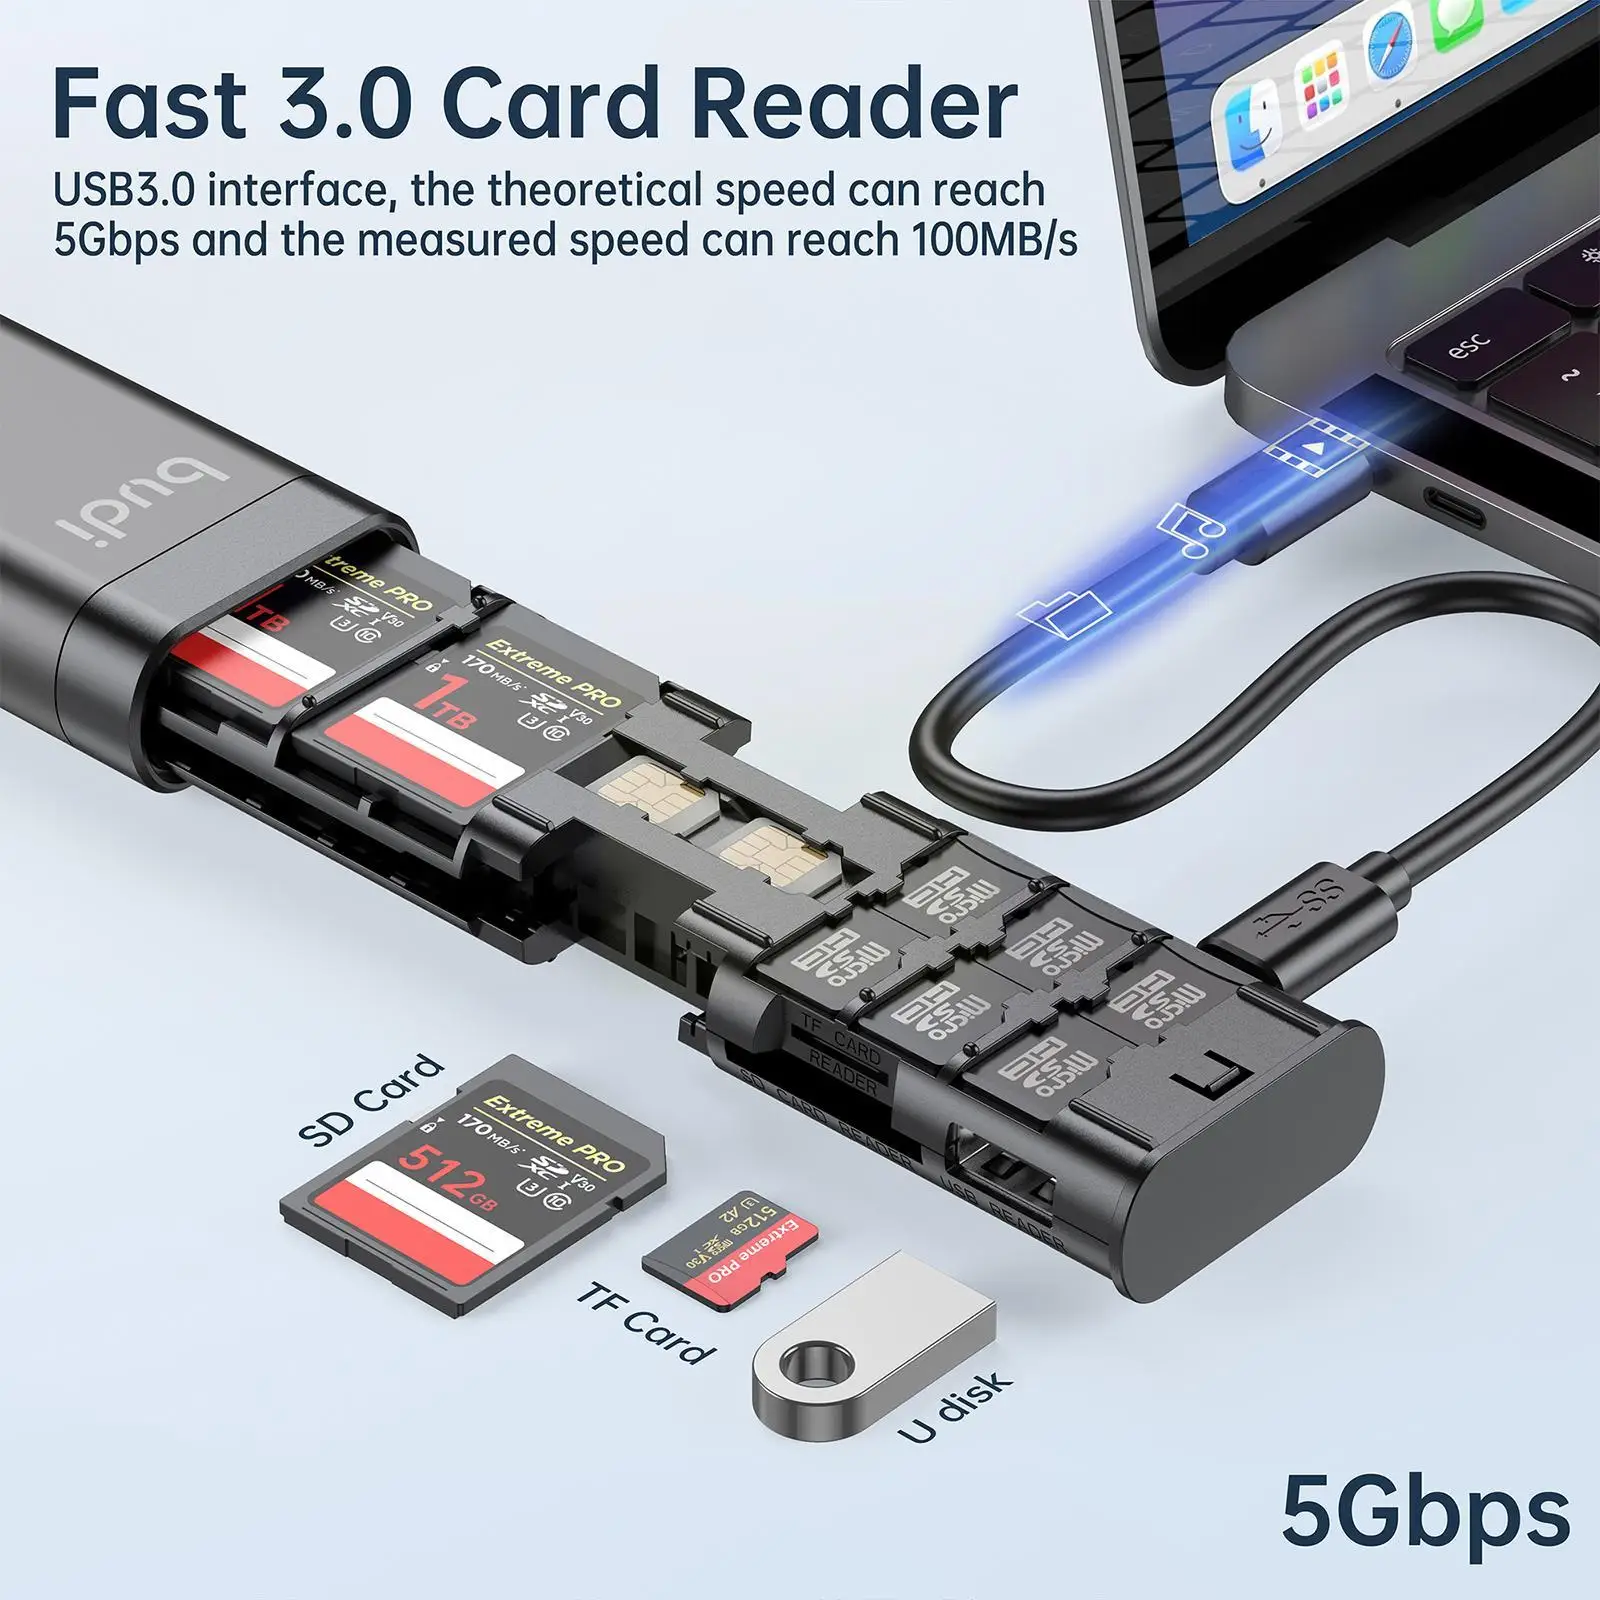 BUDI Multifunct 9 In 1 SD Card Reader Cable USB 3.0 Card High Box Tool Type-C Transfer 5Gbps Card Adapter Memory Reader Spe Q5S9